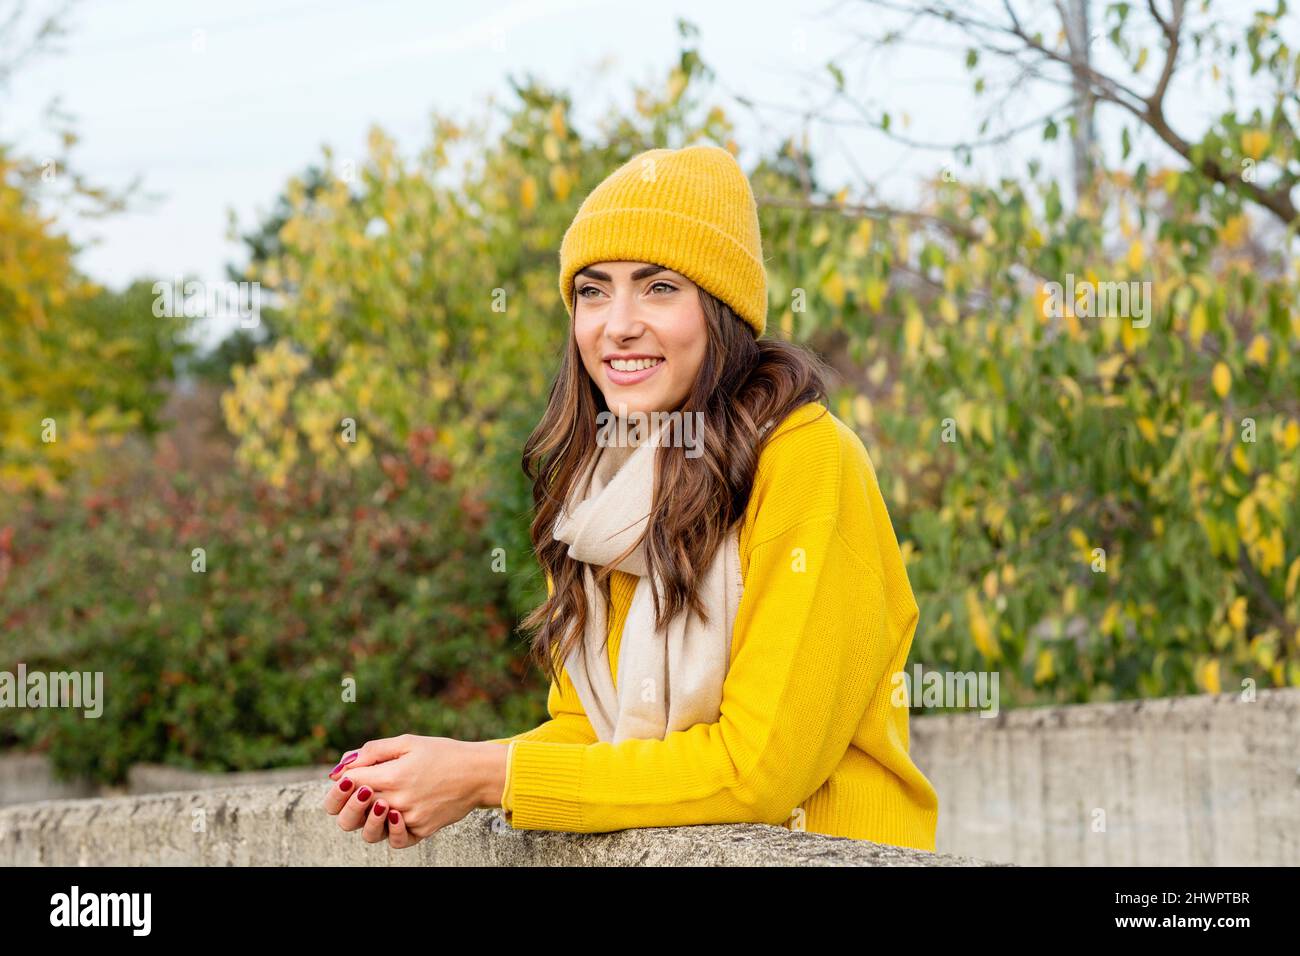 Young woman with yellow jumper and knit hat leaning on wall in park Stock Photo